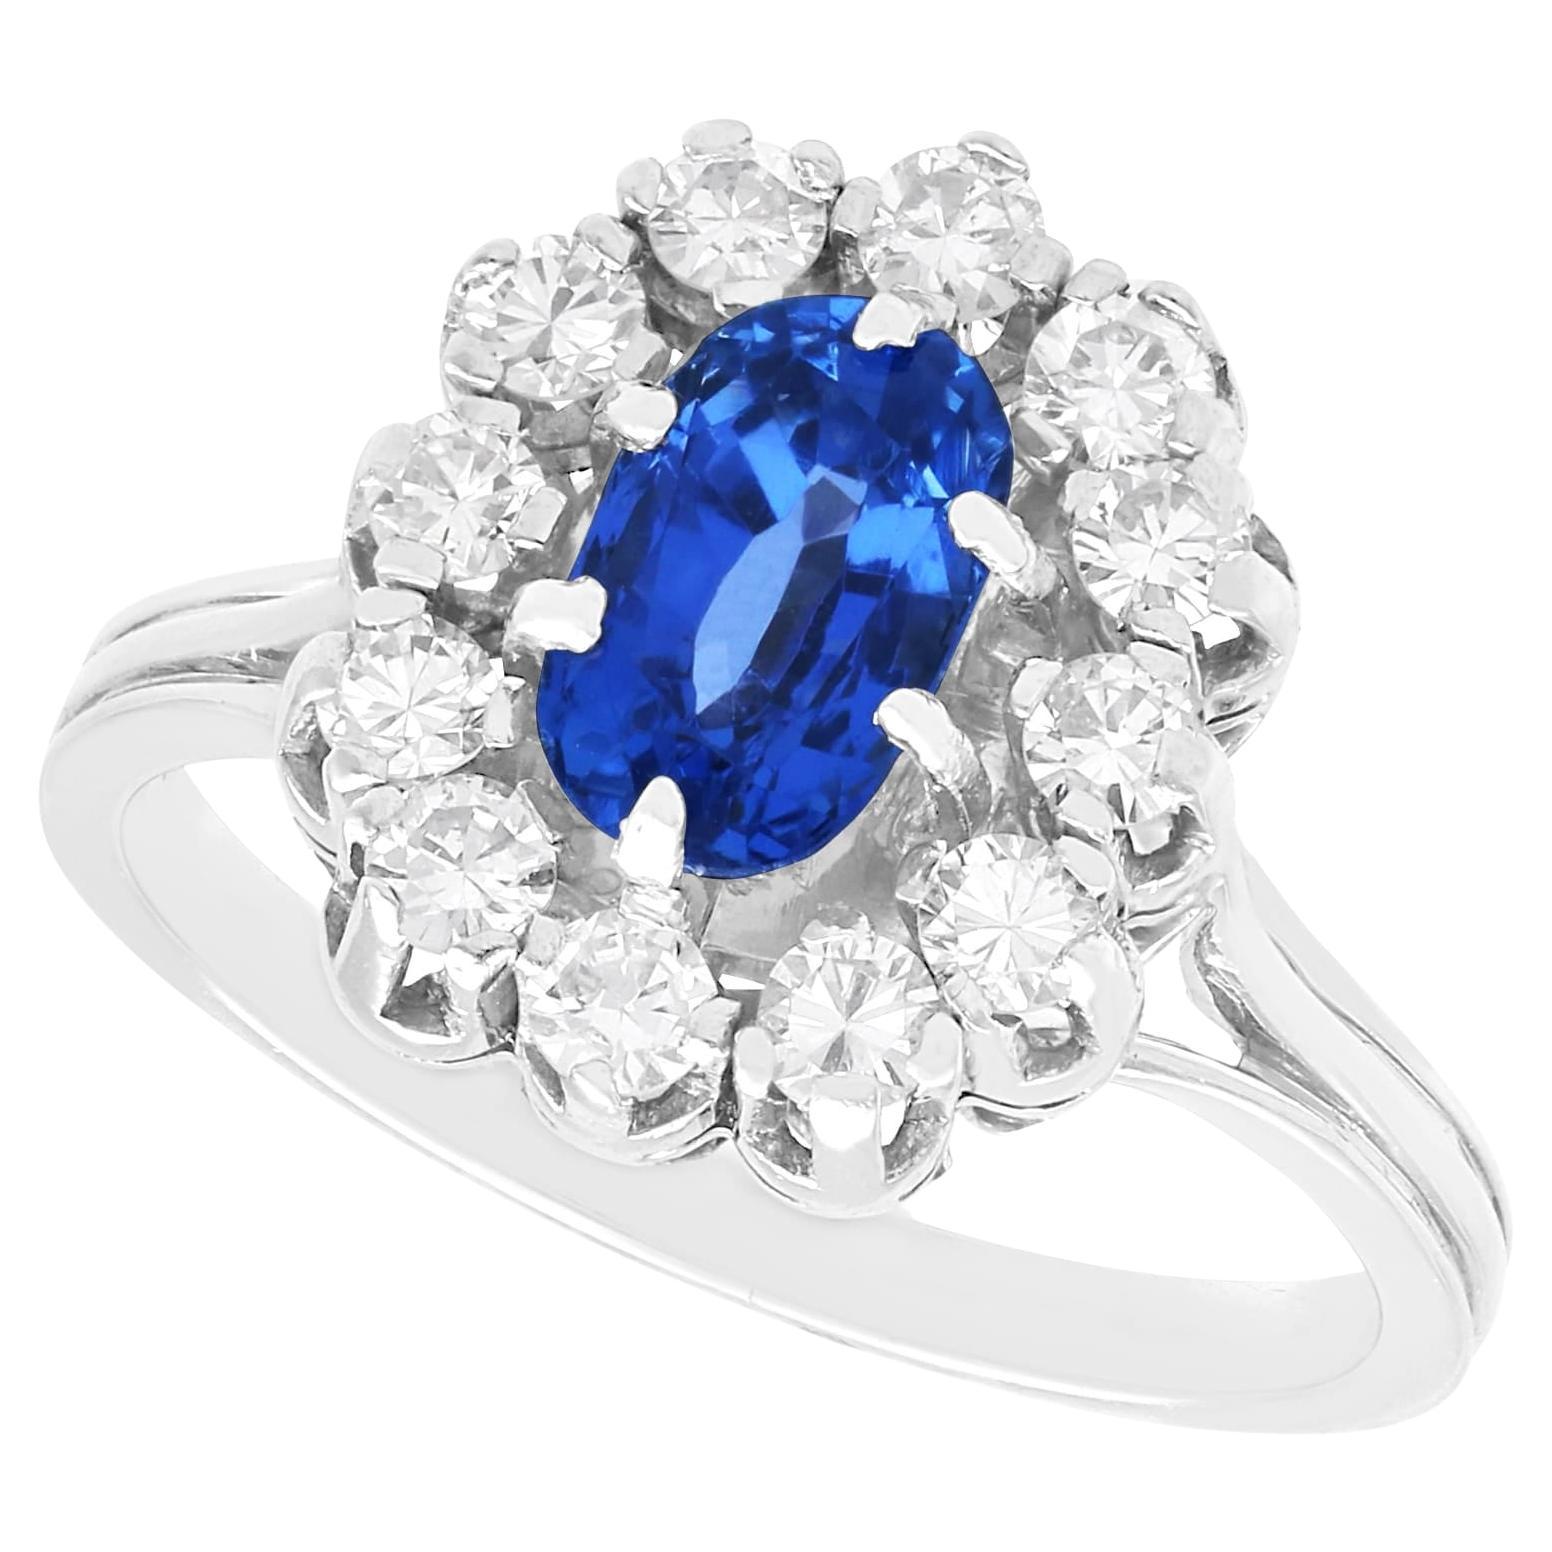 Vintage 2.36 Carat Basaltic Sapphire and Diamond 18k White Gold Cluster Ring  For Sale